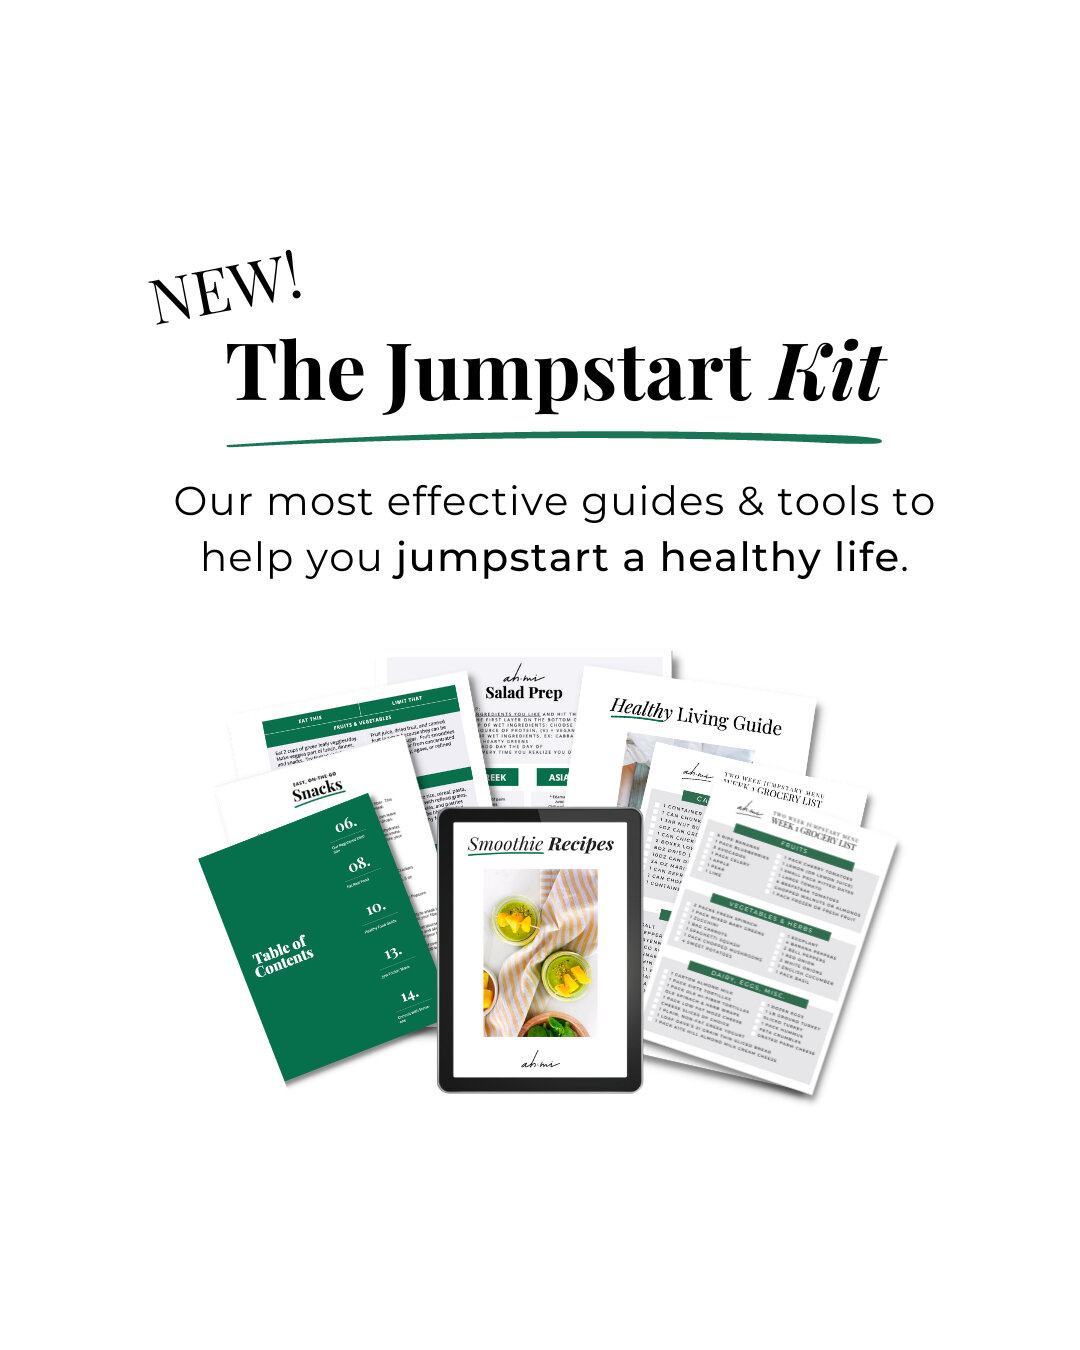 Feel like you're too busy, tried it all, or overwhelmed by the noise and don't know where to start? We felt the same. ​​​​​​​​​
That's why we compiled the most effective guides and tools from our member dashboard to give you a Jumpstart Kit that will